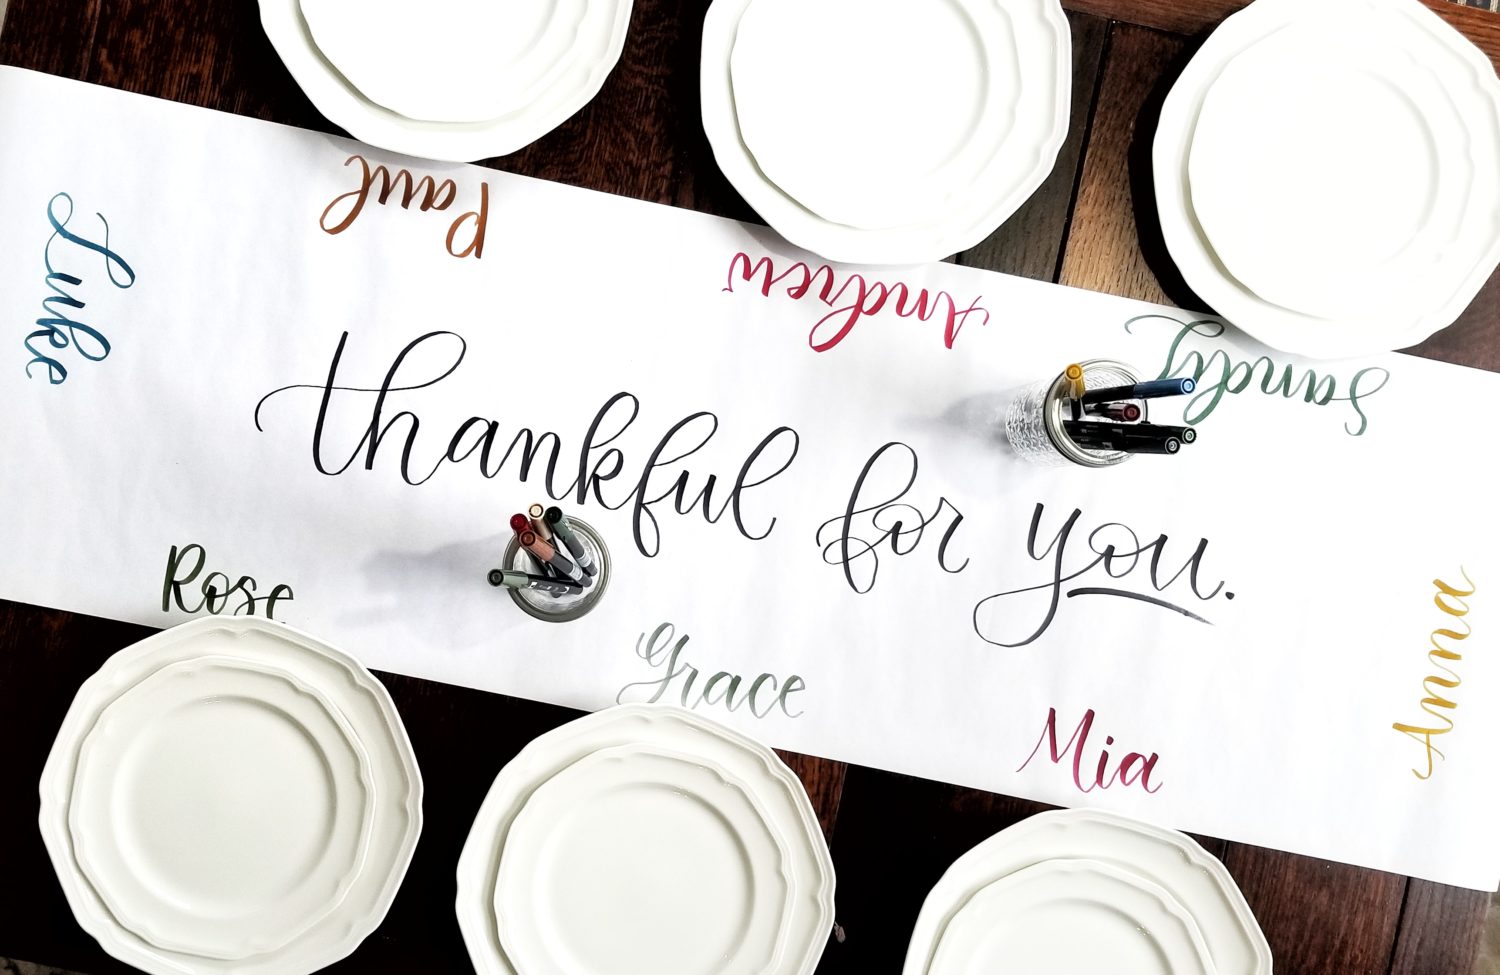 Make a personal and creative Thanksgiving table in 5 minutes with @graceannestudio using @tombowusa Dual Brush Pens!